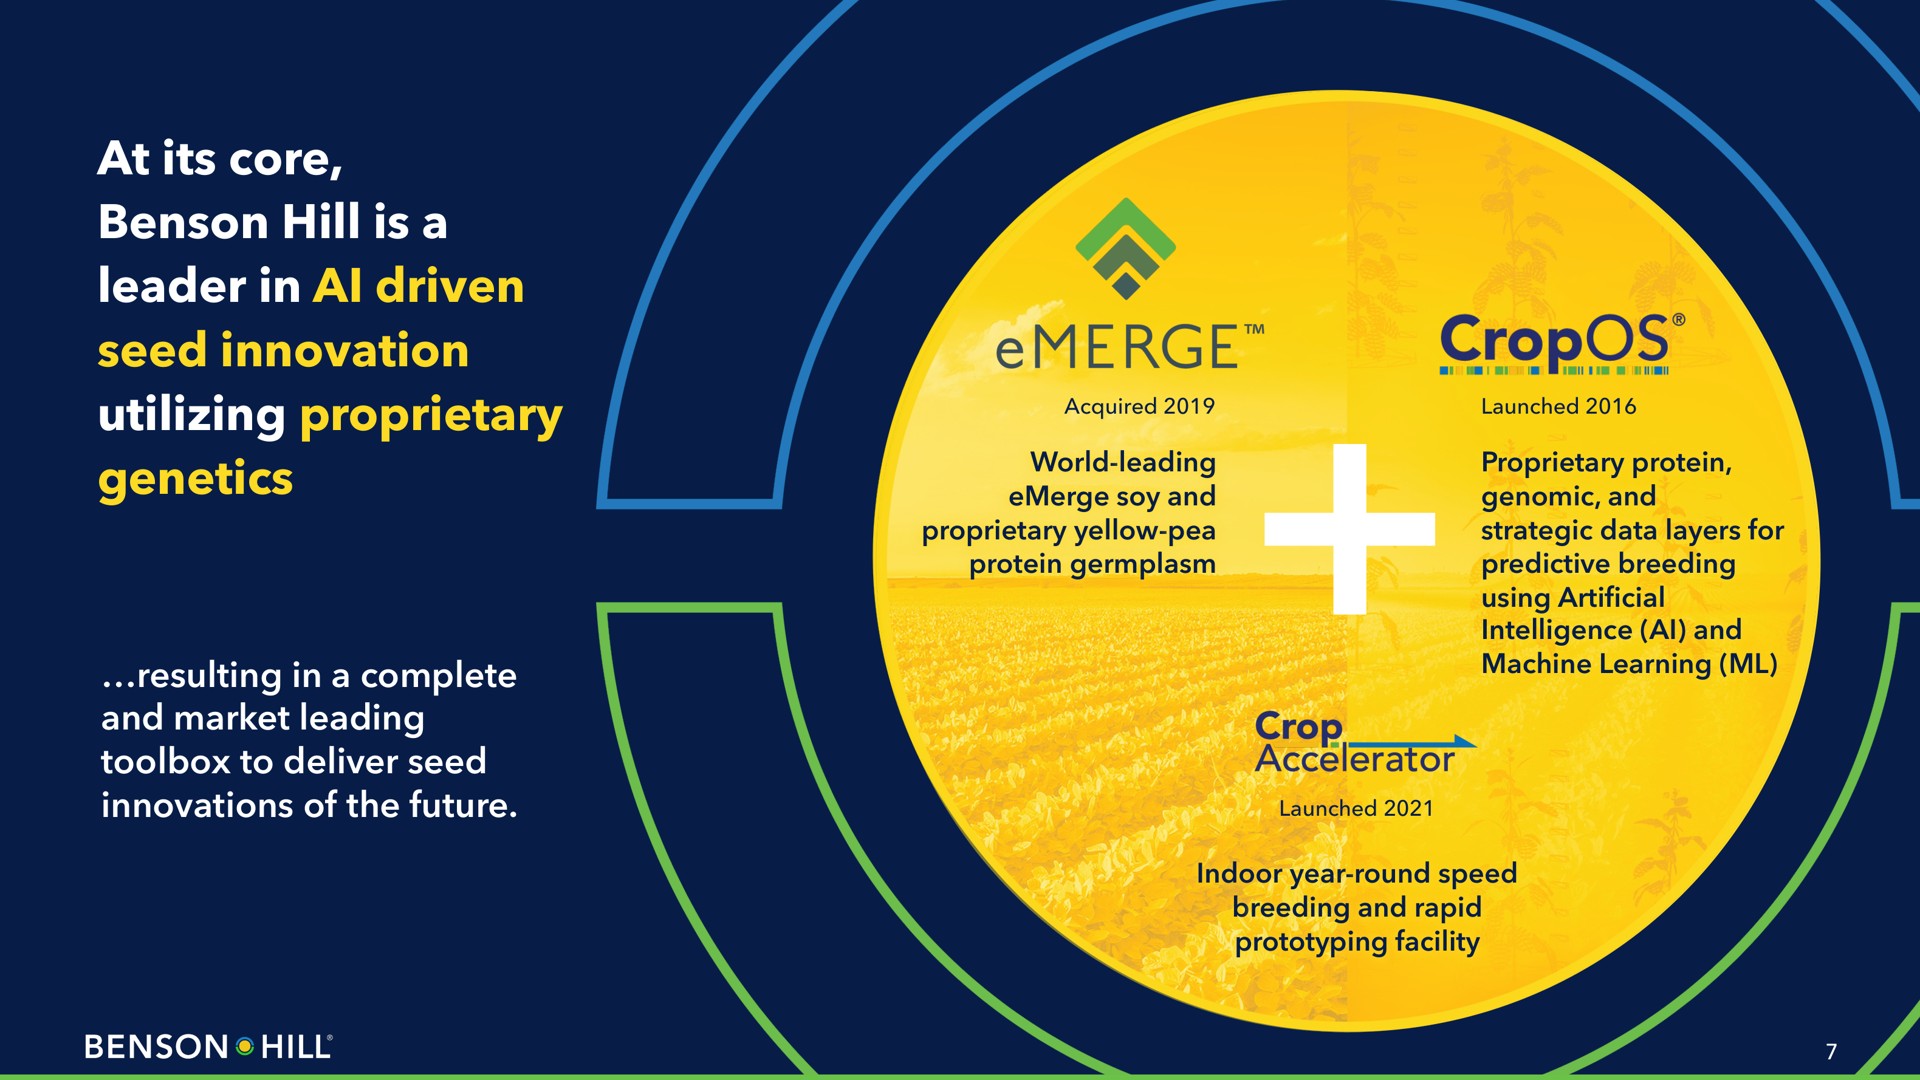 at its core hill is a leader in driven seed innovation utilizing proprietary genetics resulting in a complete and market leading toolbox to deliver seed innovations of the future world leading emerge soy and proprietary yellow pea protein proprietary protein genomic and strategic data layers for predictive breeding using artificial intelligence and machine learning indoor year round speed breeding and rapid facility cro | Benson Hill